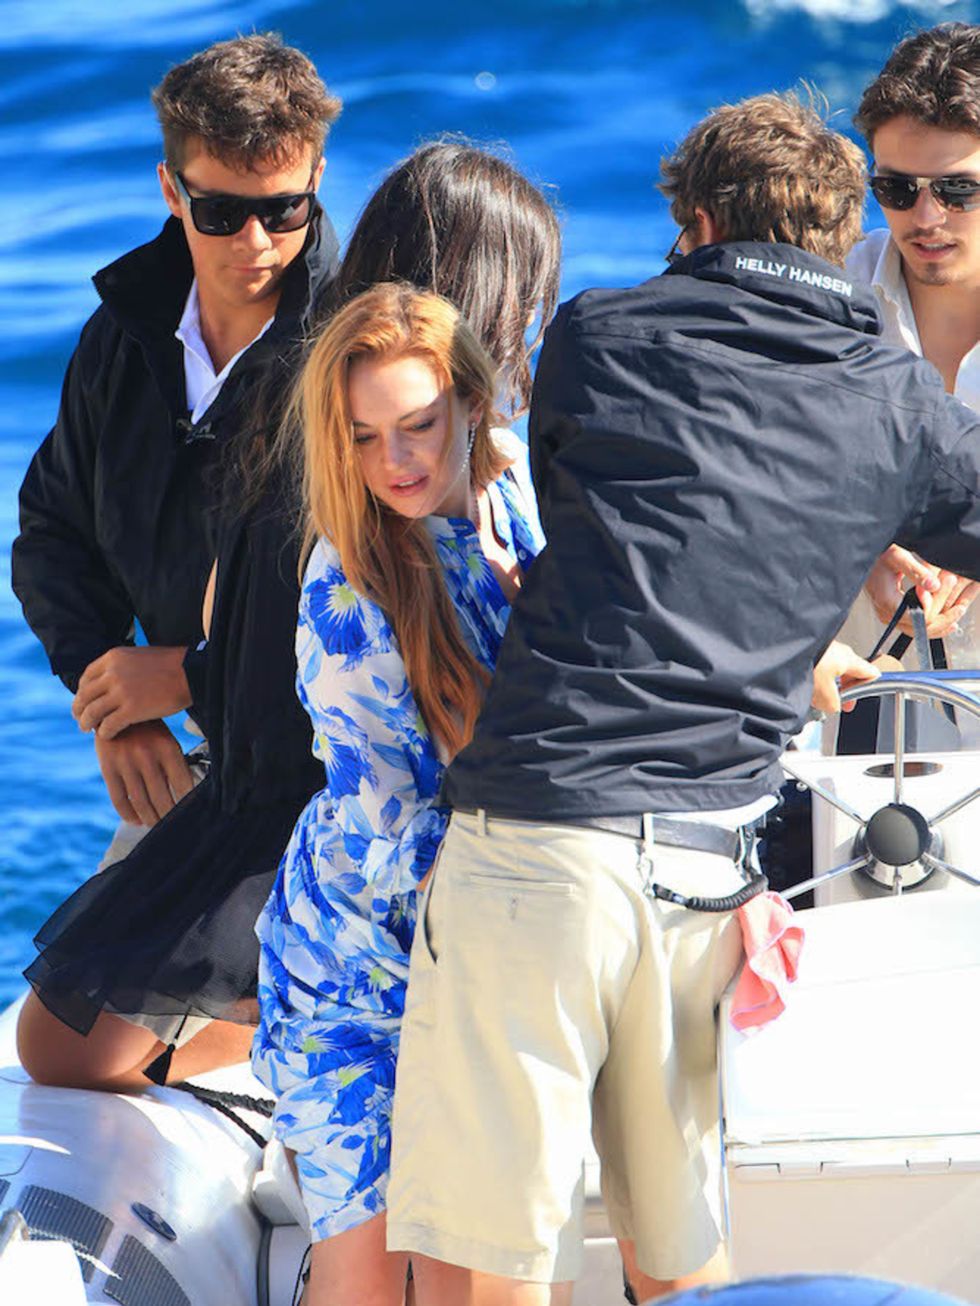 Lindsay Lohan goes yacht hopping in Cannes, south of France this May with her fiance Egor Tarabasov